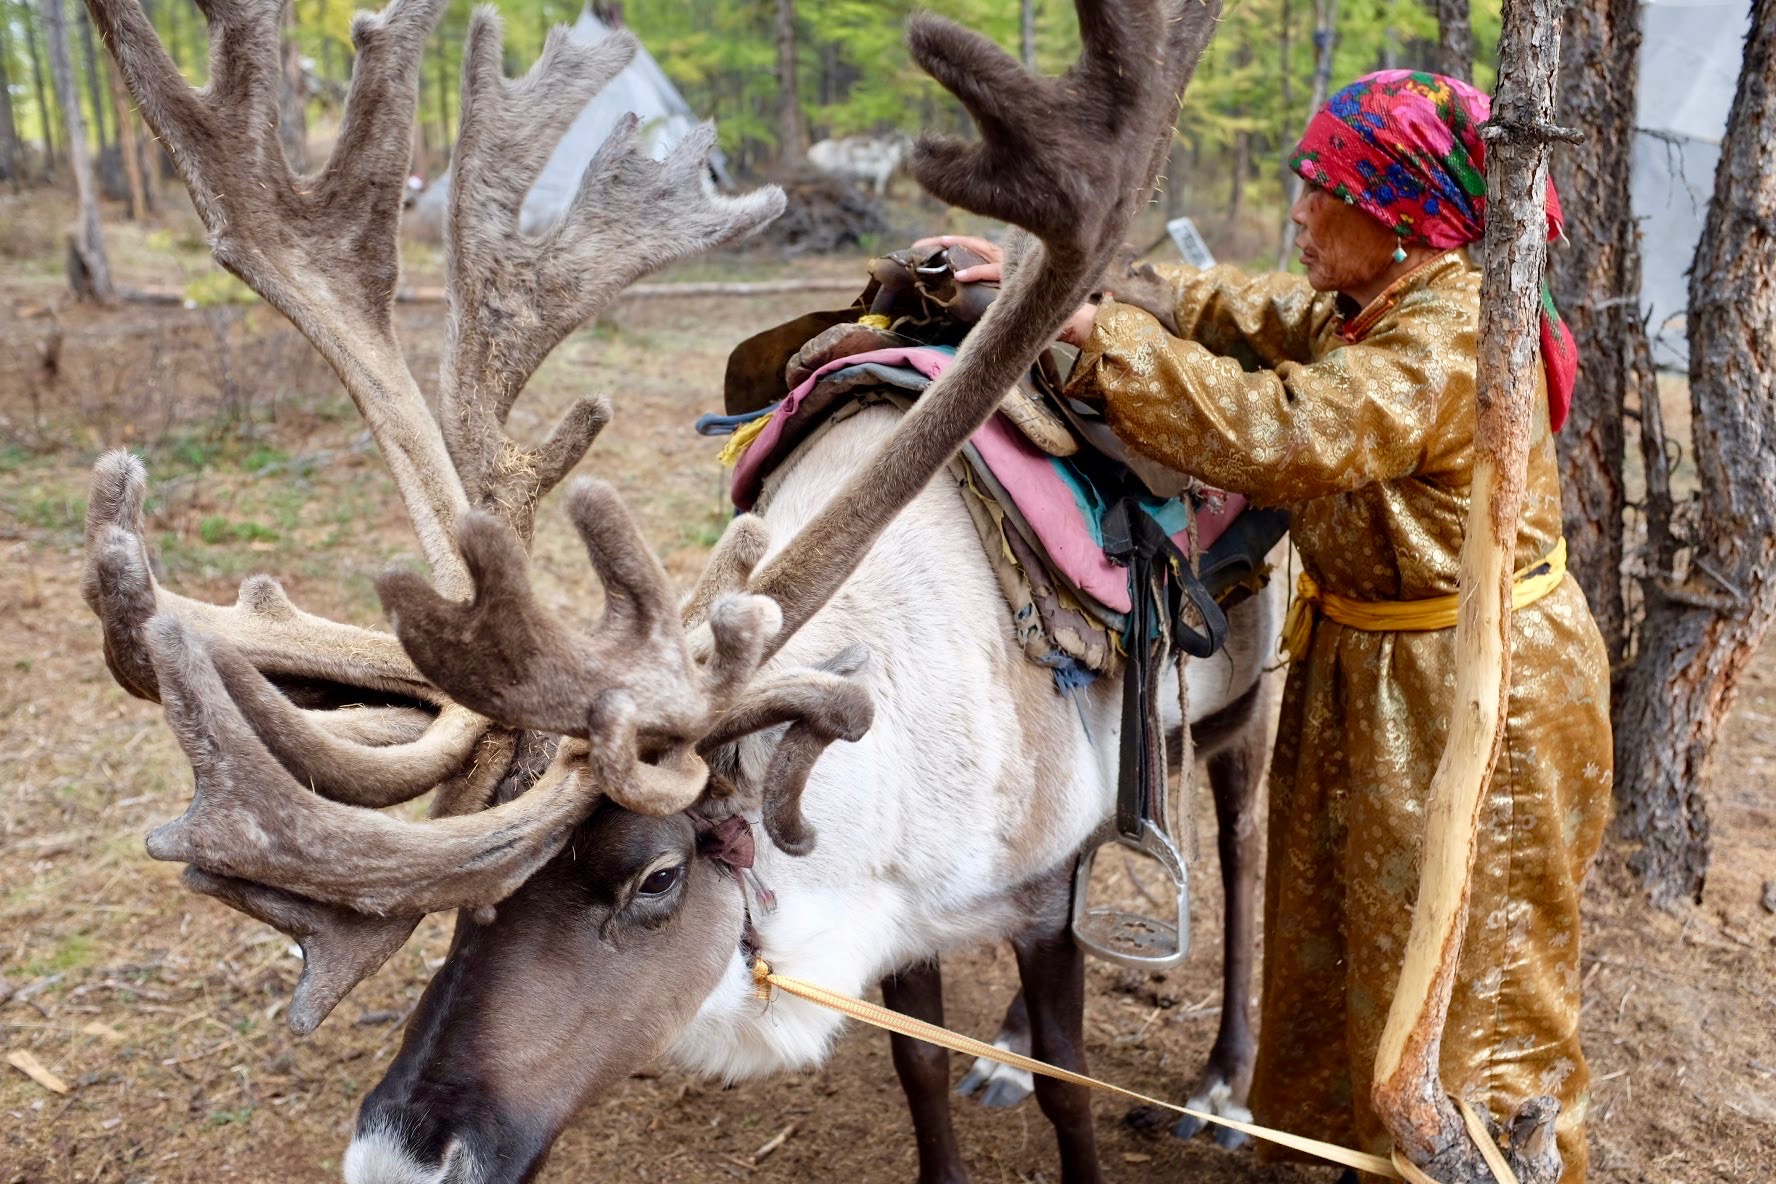 Reindeer herder saddling a large reindeer in Northern Mongolia on an Estancia Ranquilco horse pack trip